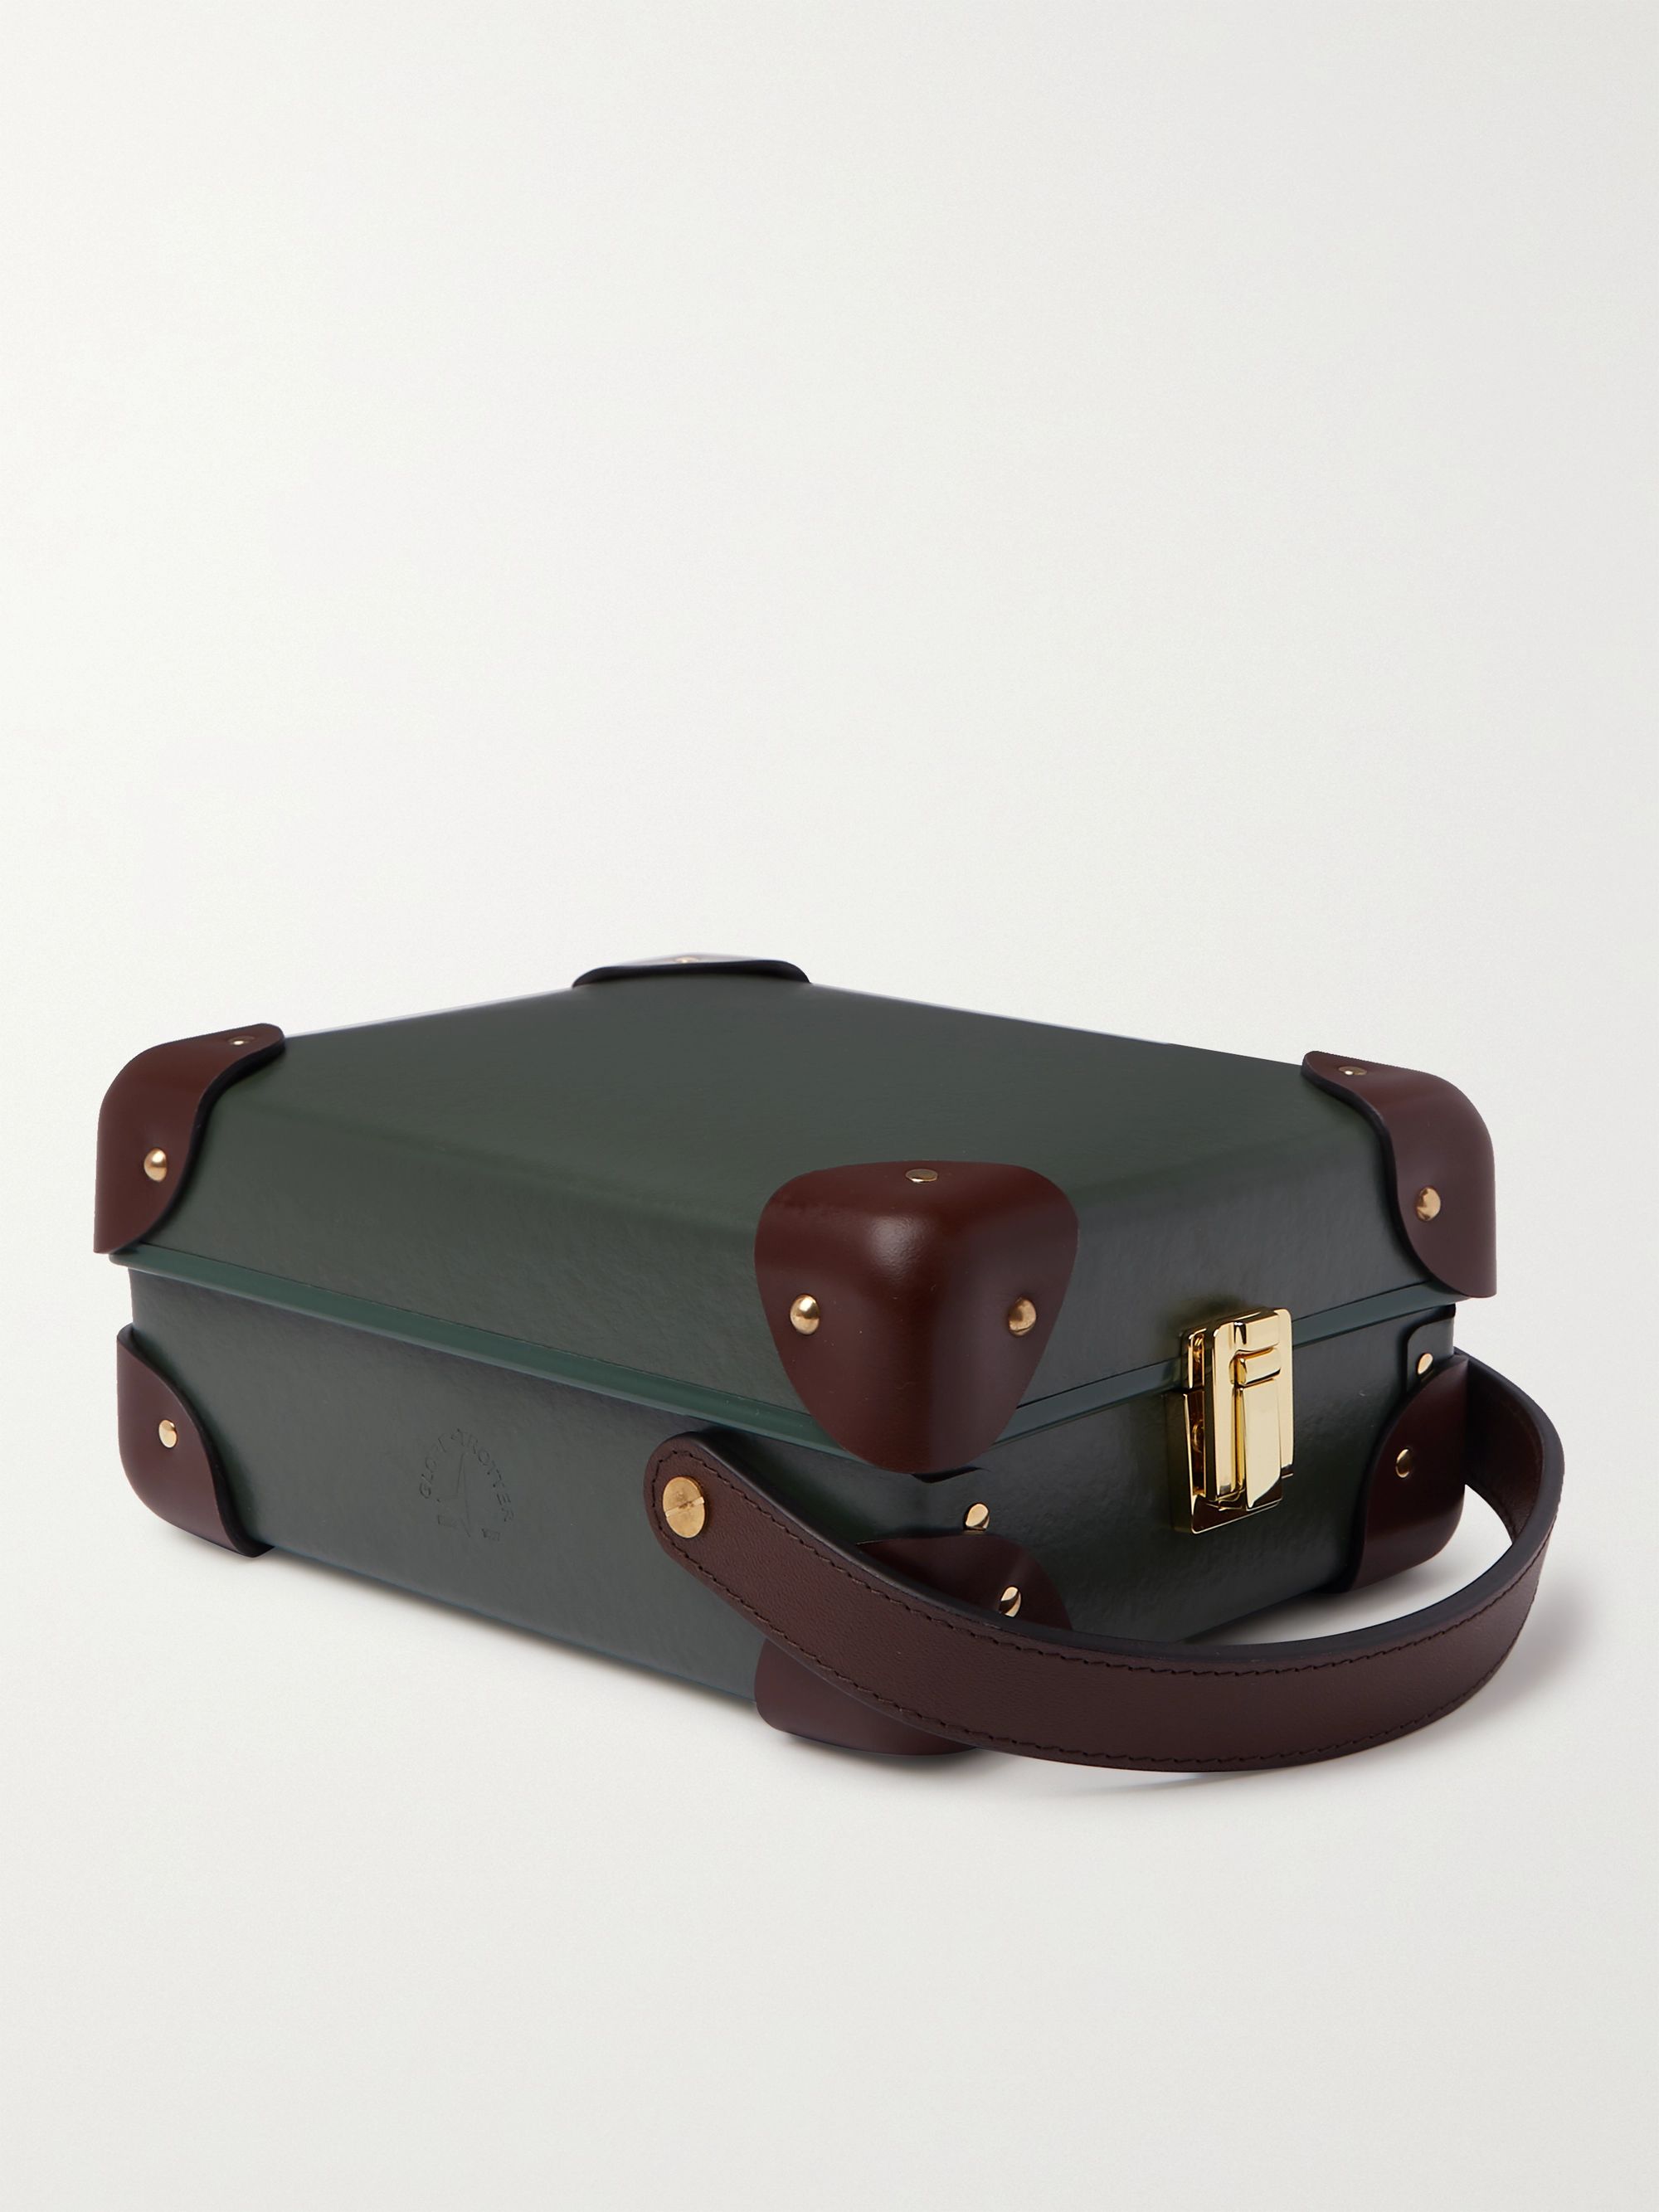 GLOBE-TROTTER Leather-Trimmed Three-Watch Case